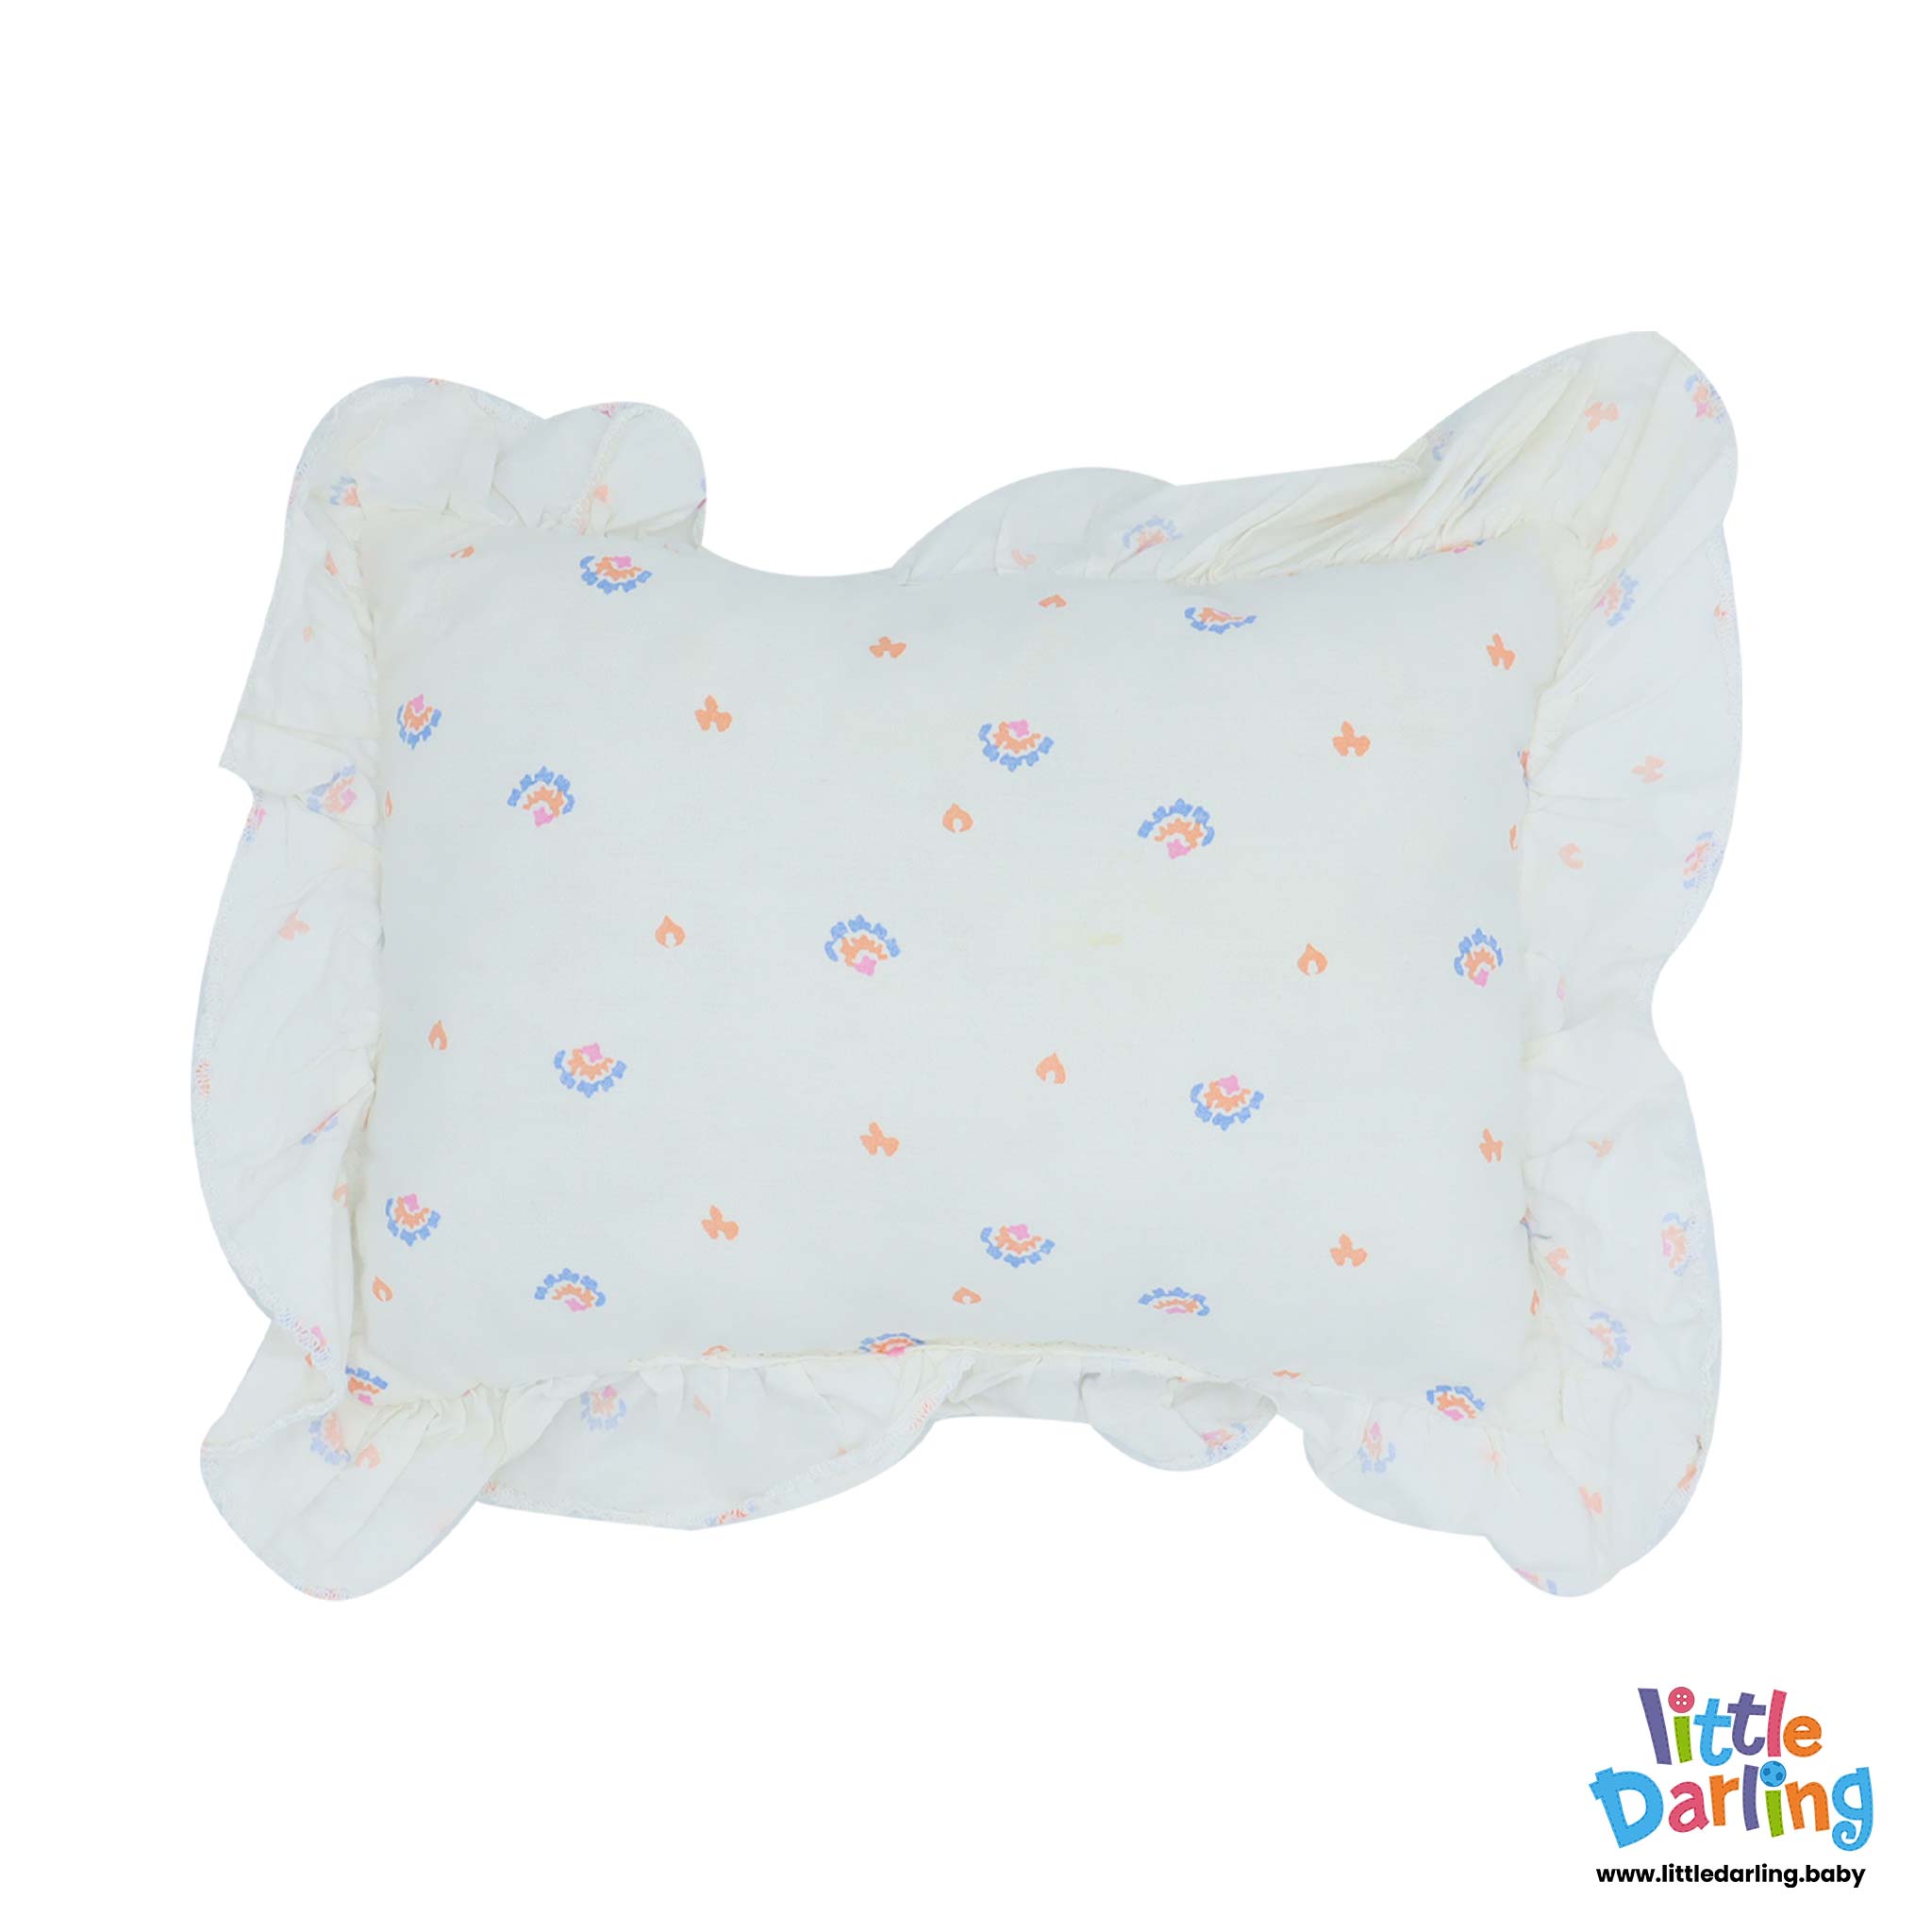 Head Pillow Set PK Of 3 White Color by Little Darling